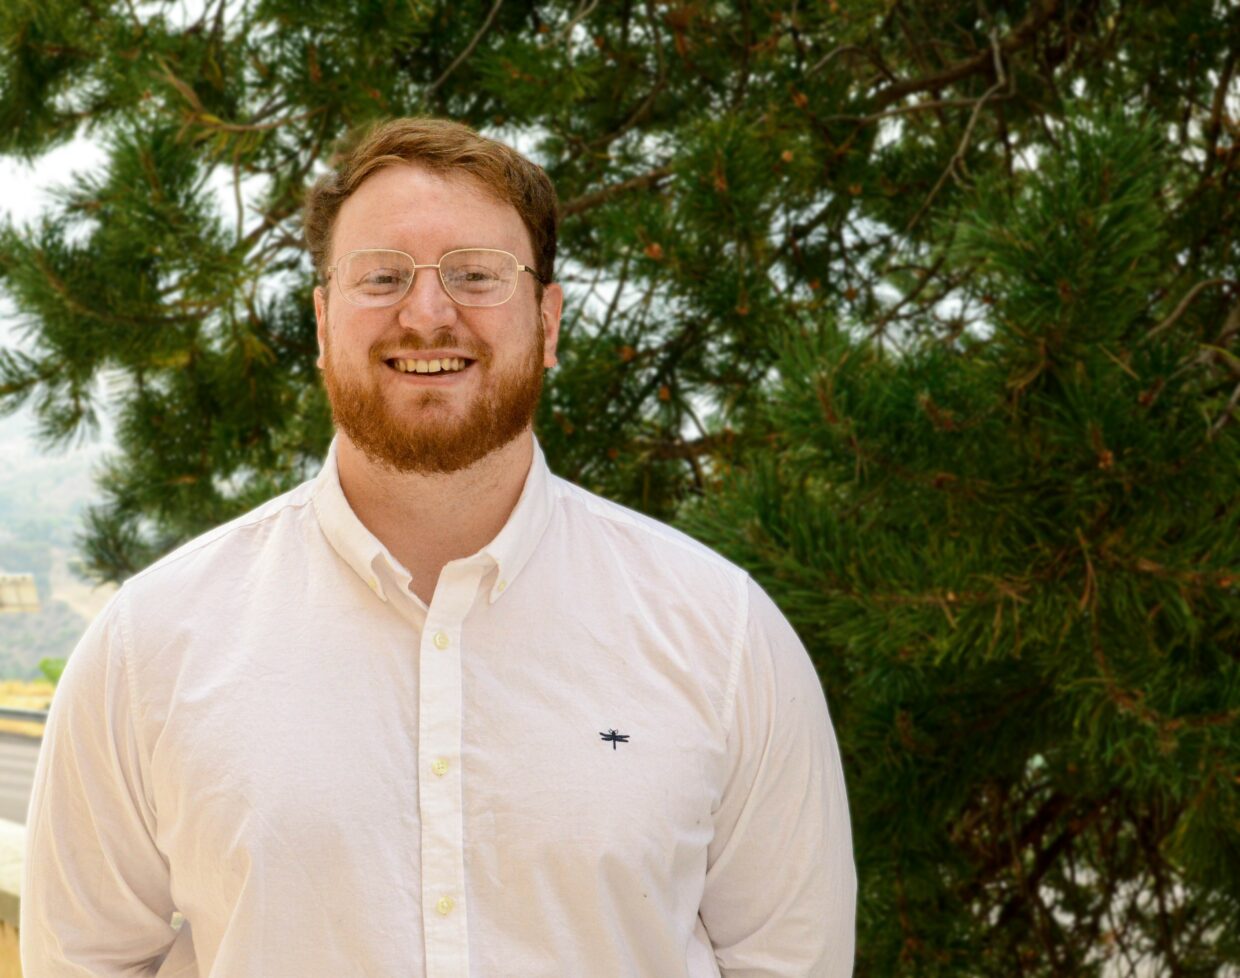 Daniel Fleming has short red hair, glasses and a beard. Daniel is wearing a white button down shirt and is standing next to a tree in Utah